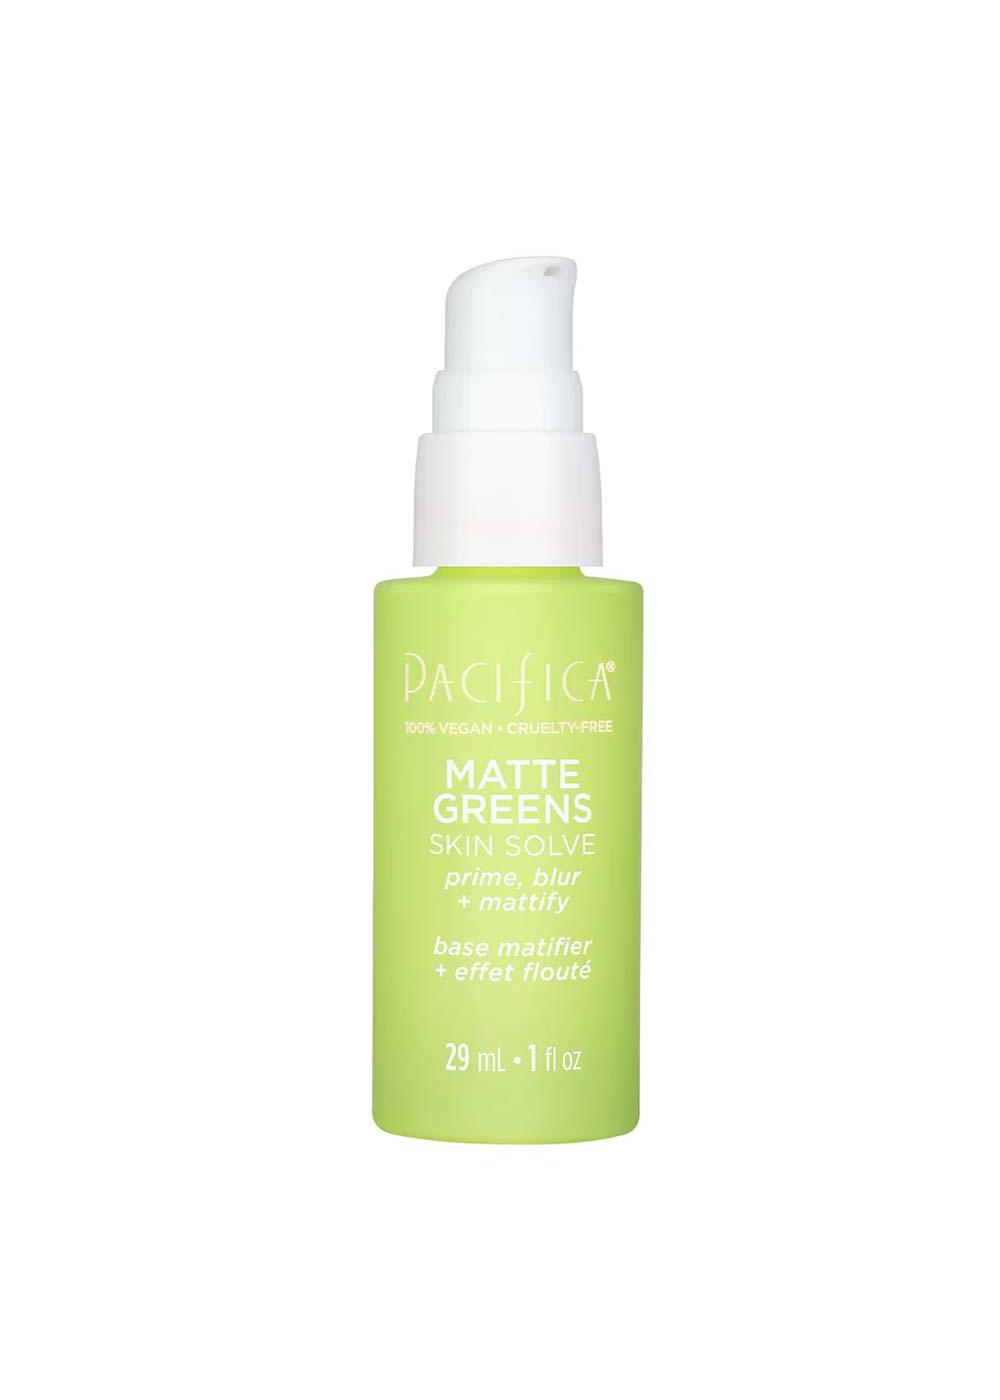 Pacifica Matte Greens Skin Solve; image 1 of 3